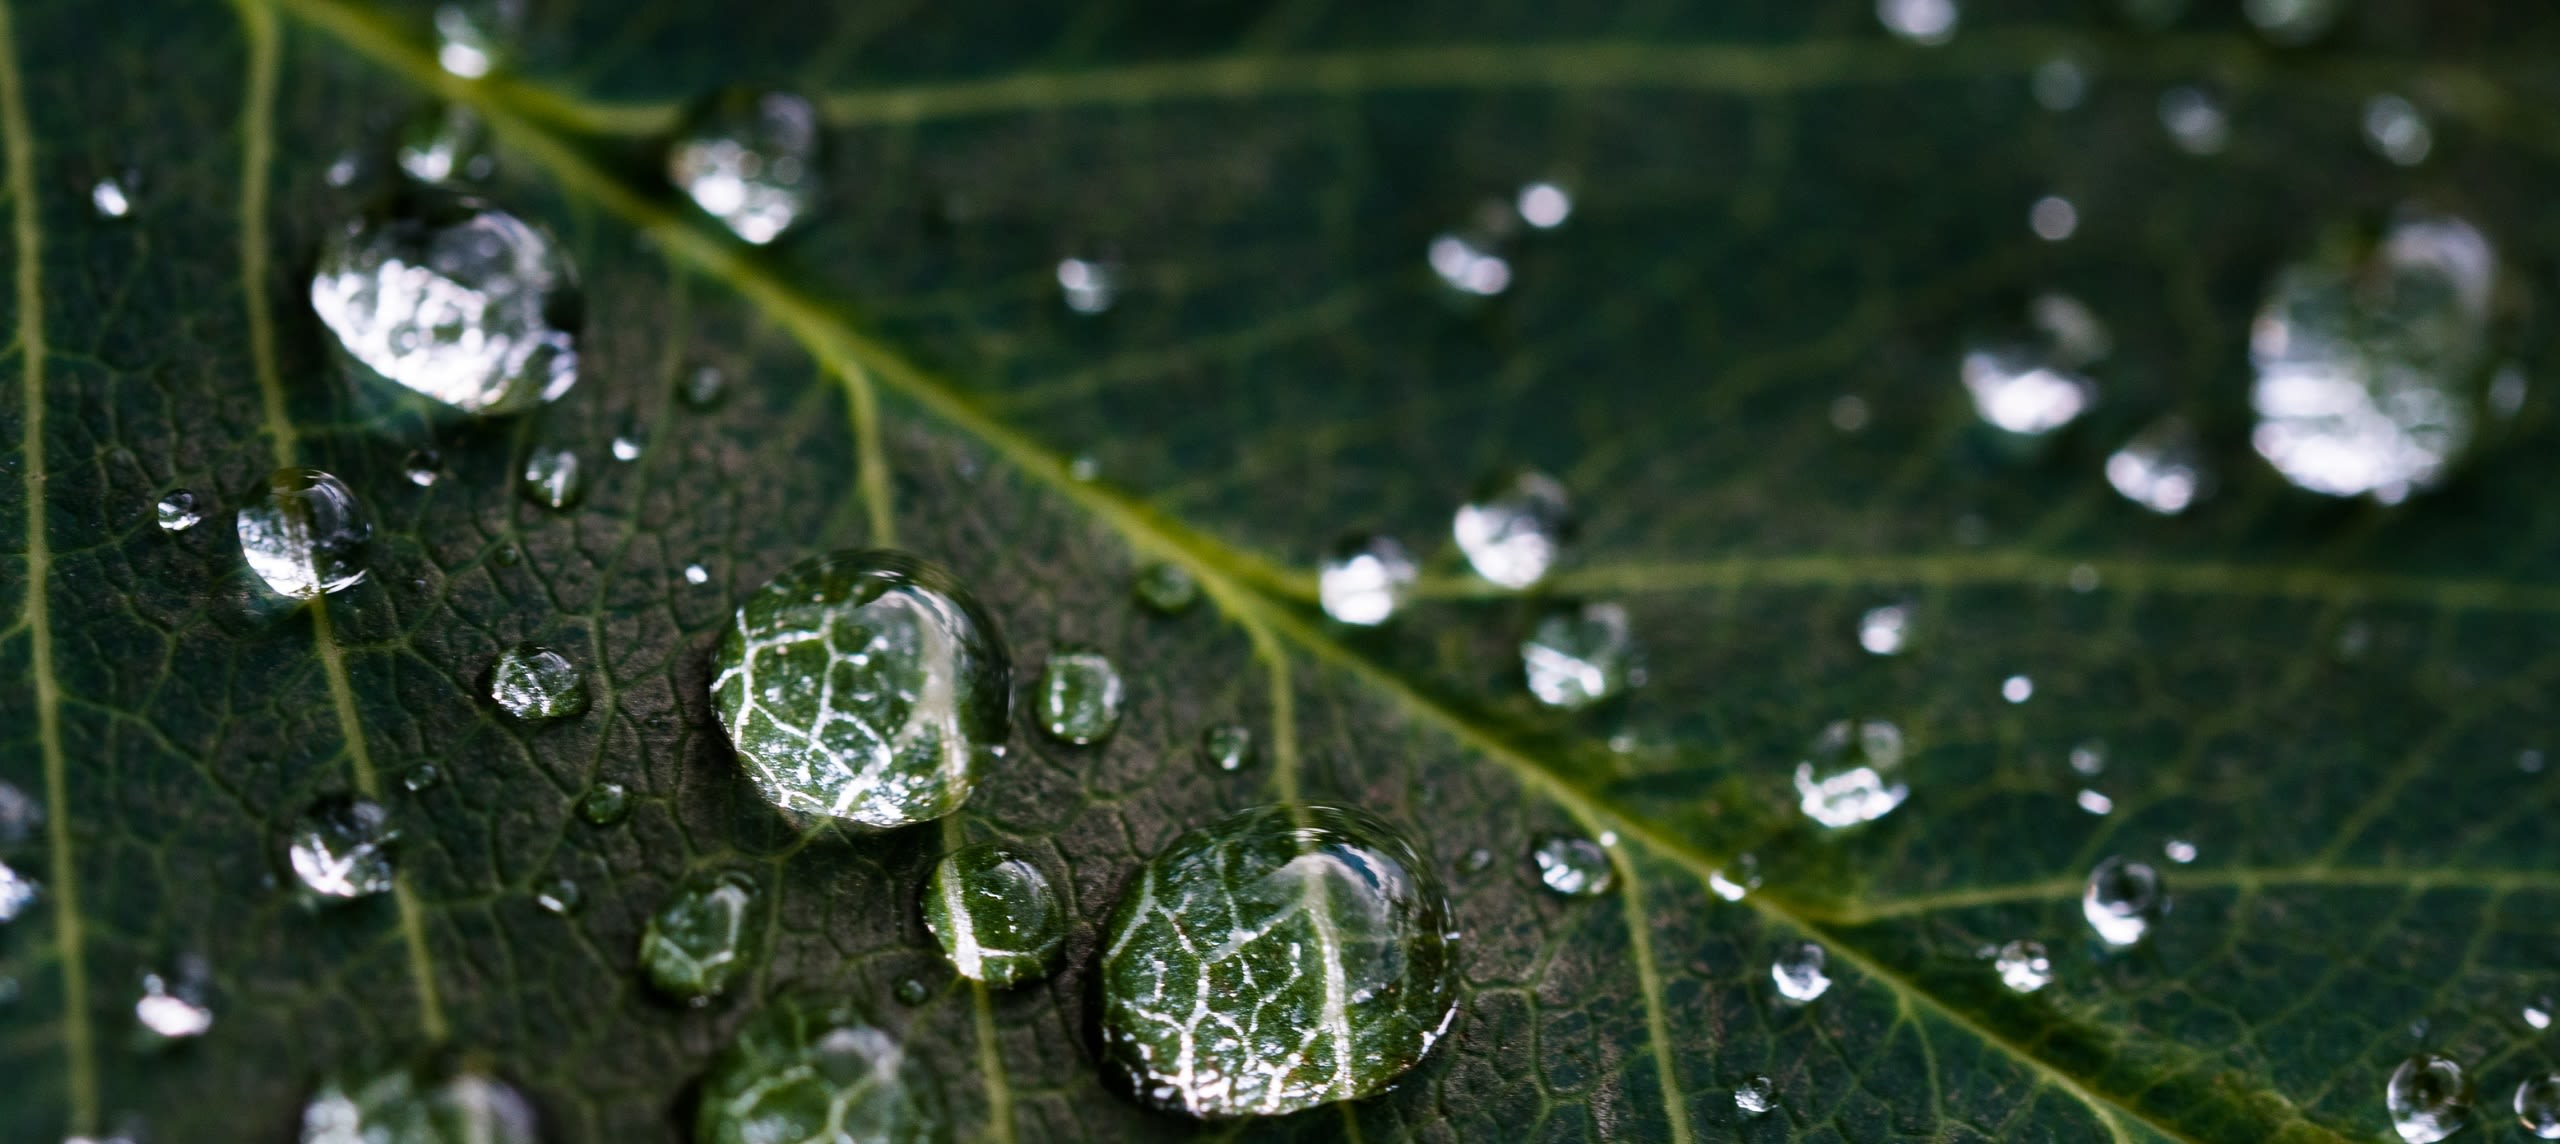 Close-up of water droplets on a leaf